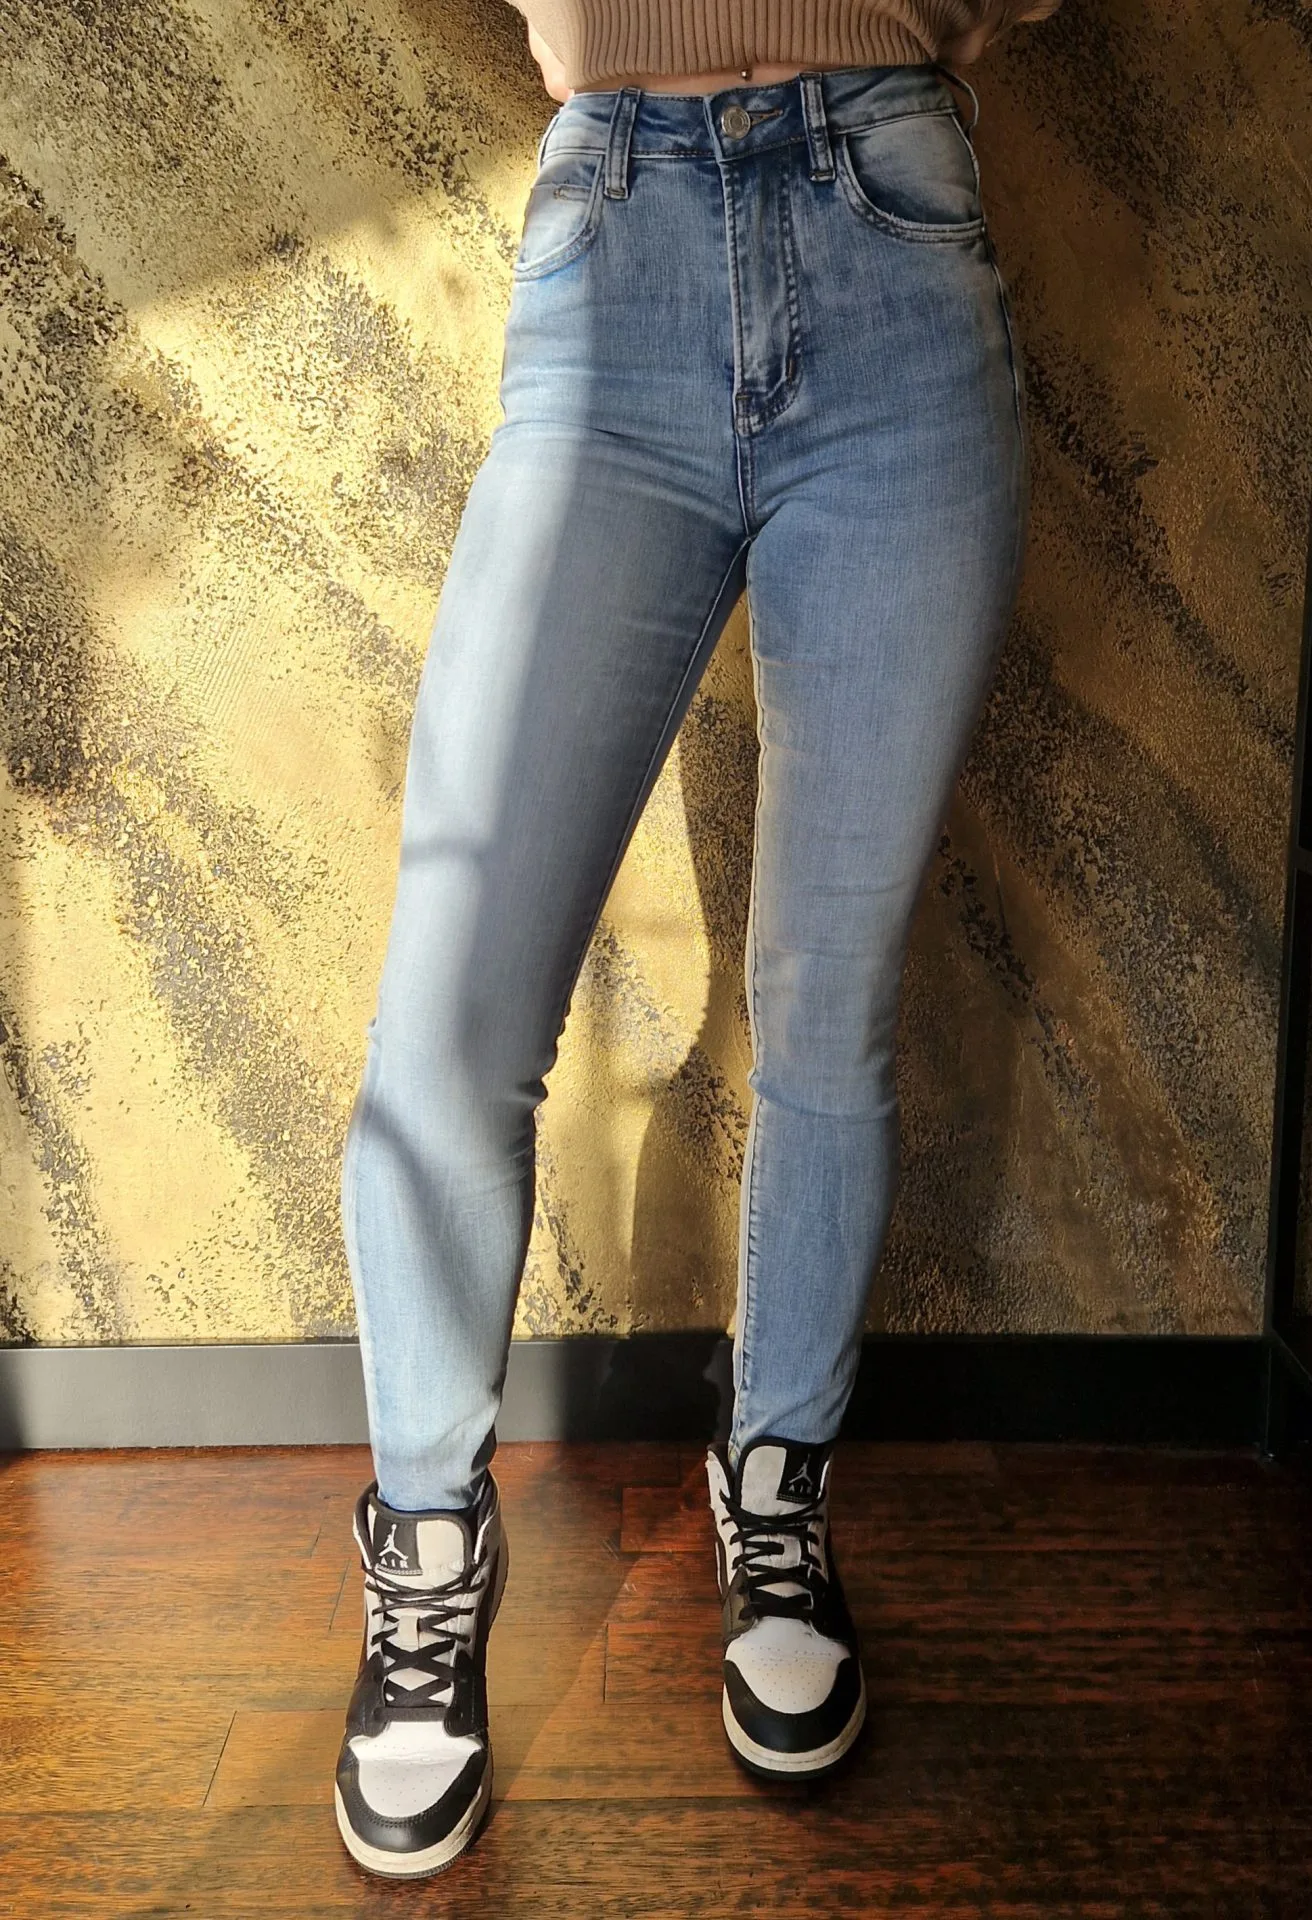 A fit girl wearing skintight jeans, frontal view of the crotch.